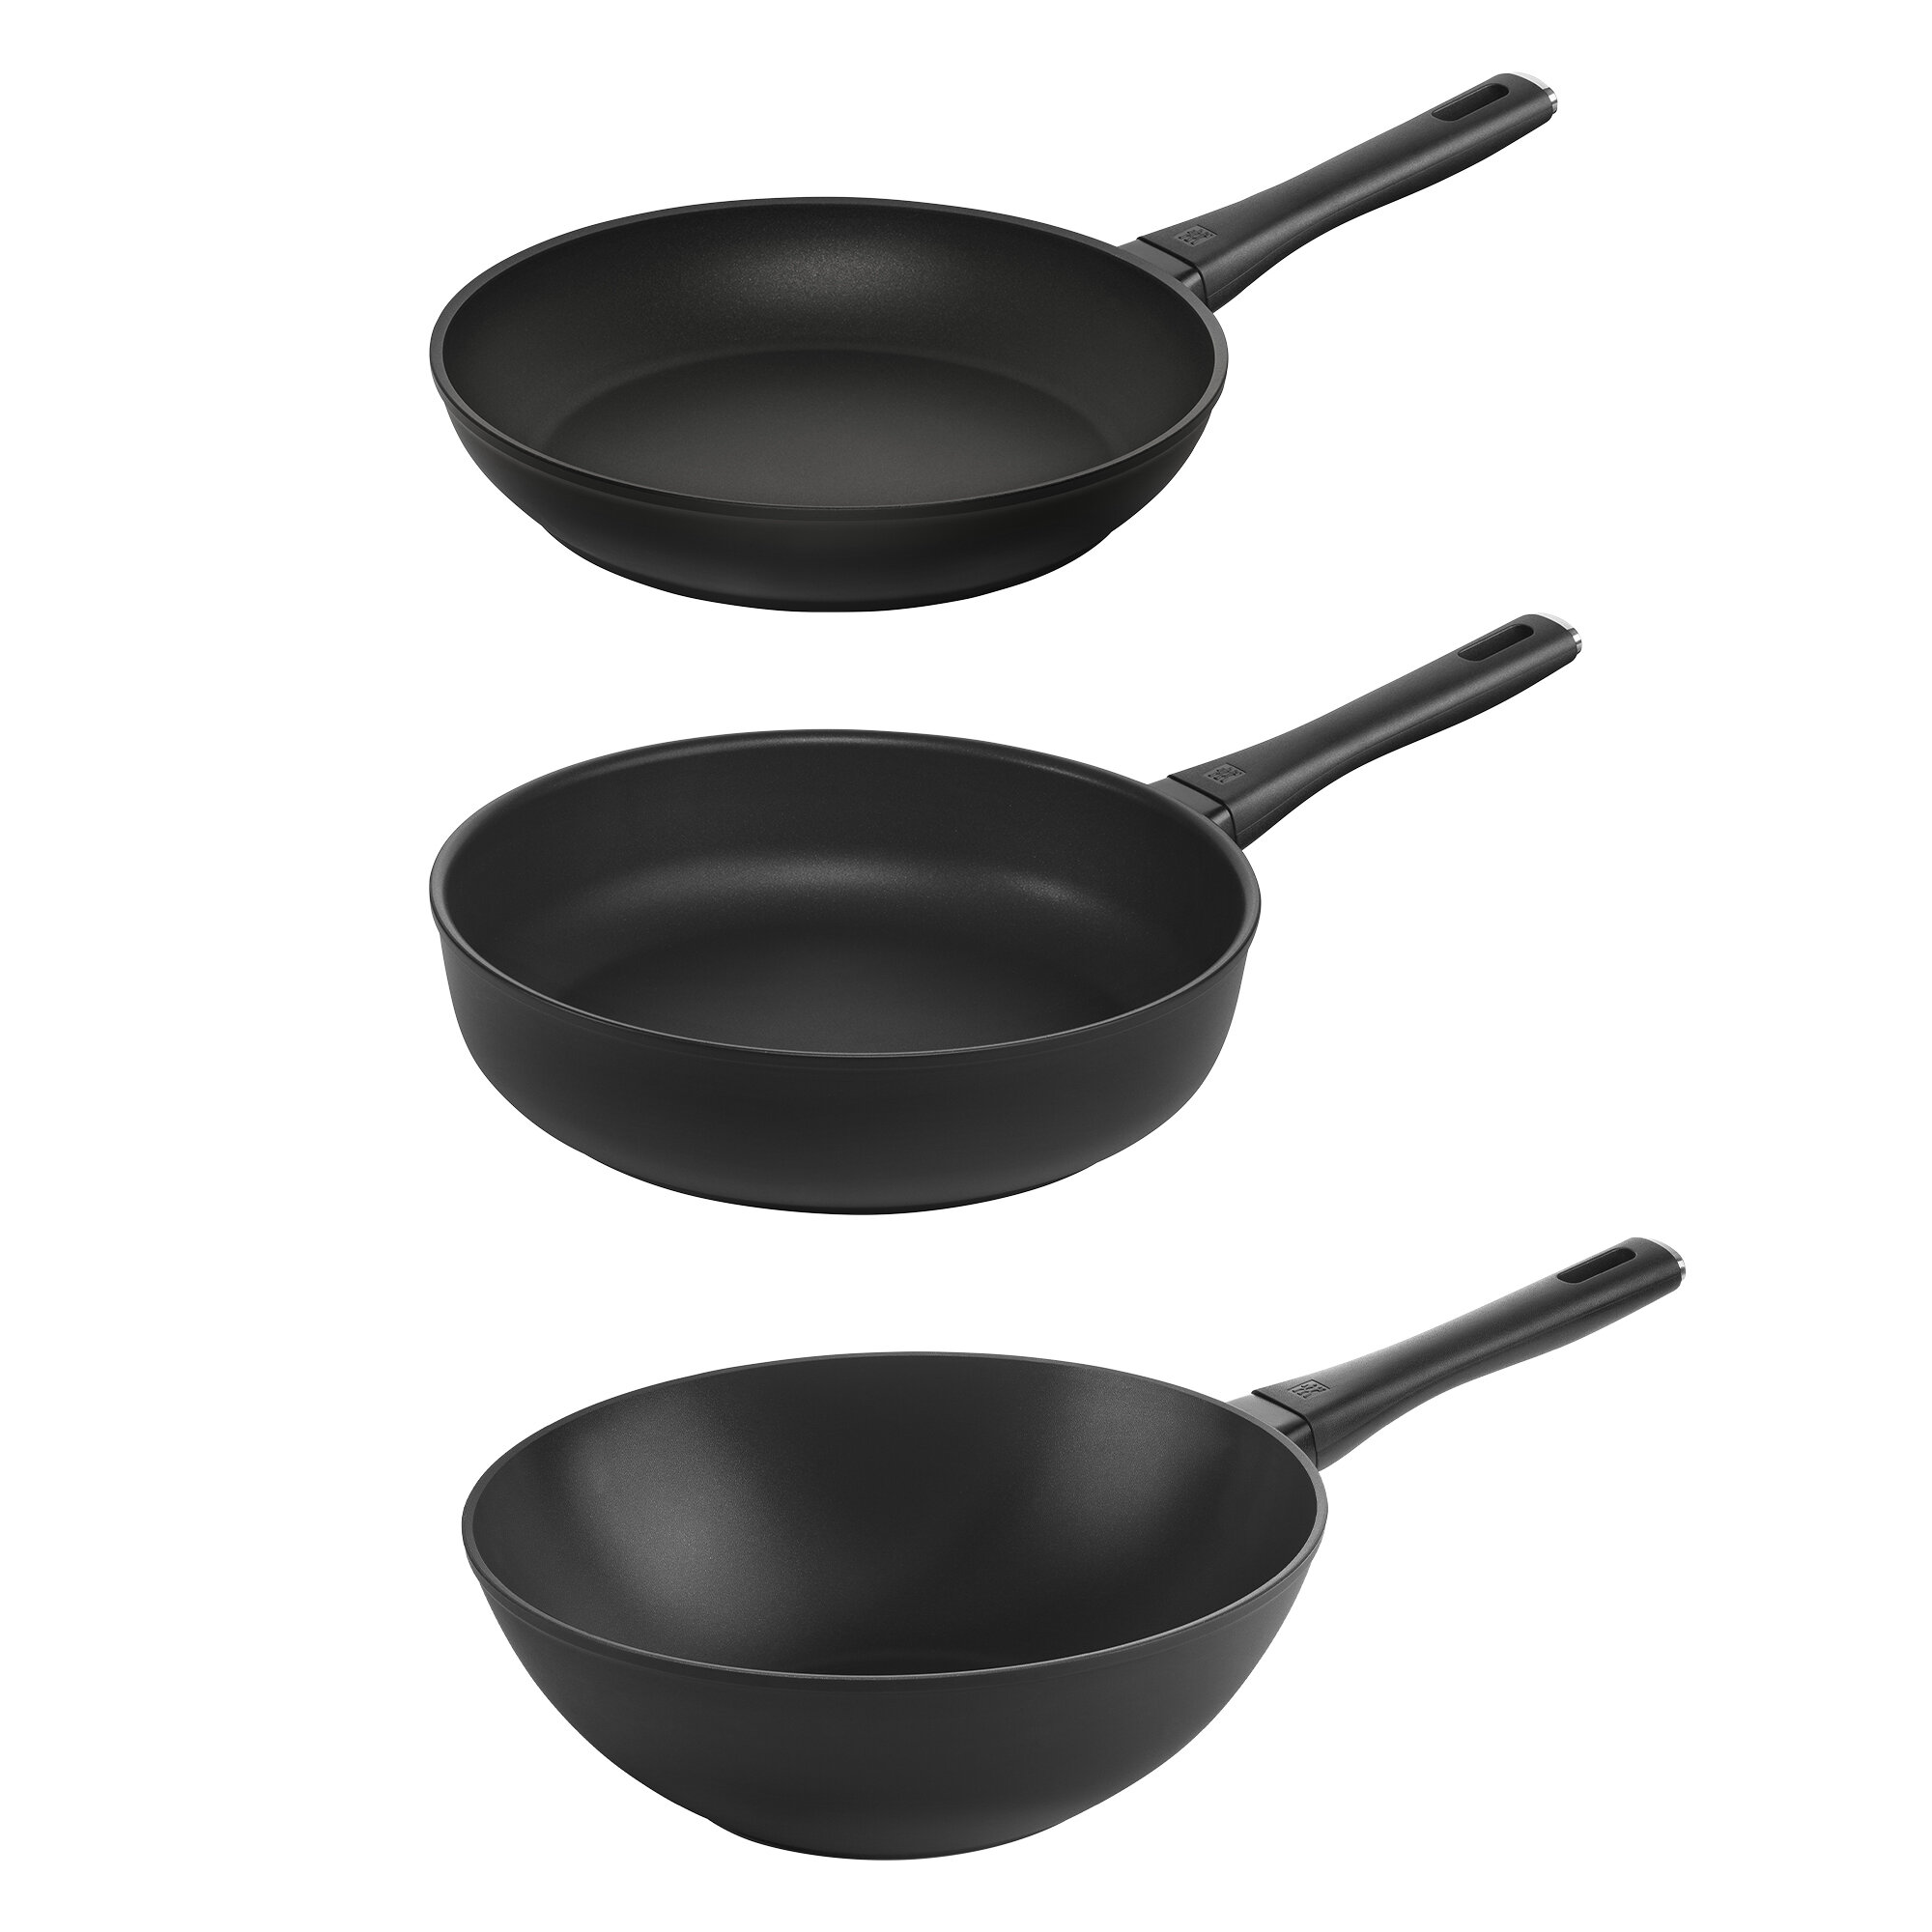 New ZWILLING J.A.HENCKELS 2pc Piece Energy Plus FRY PAN Nonstick Stainless Steel